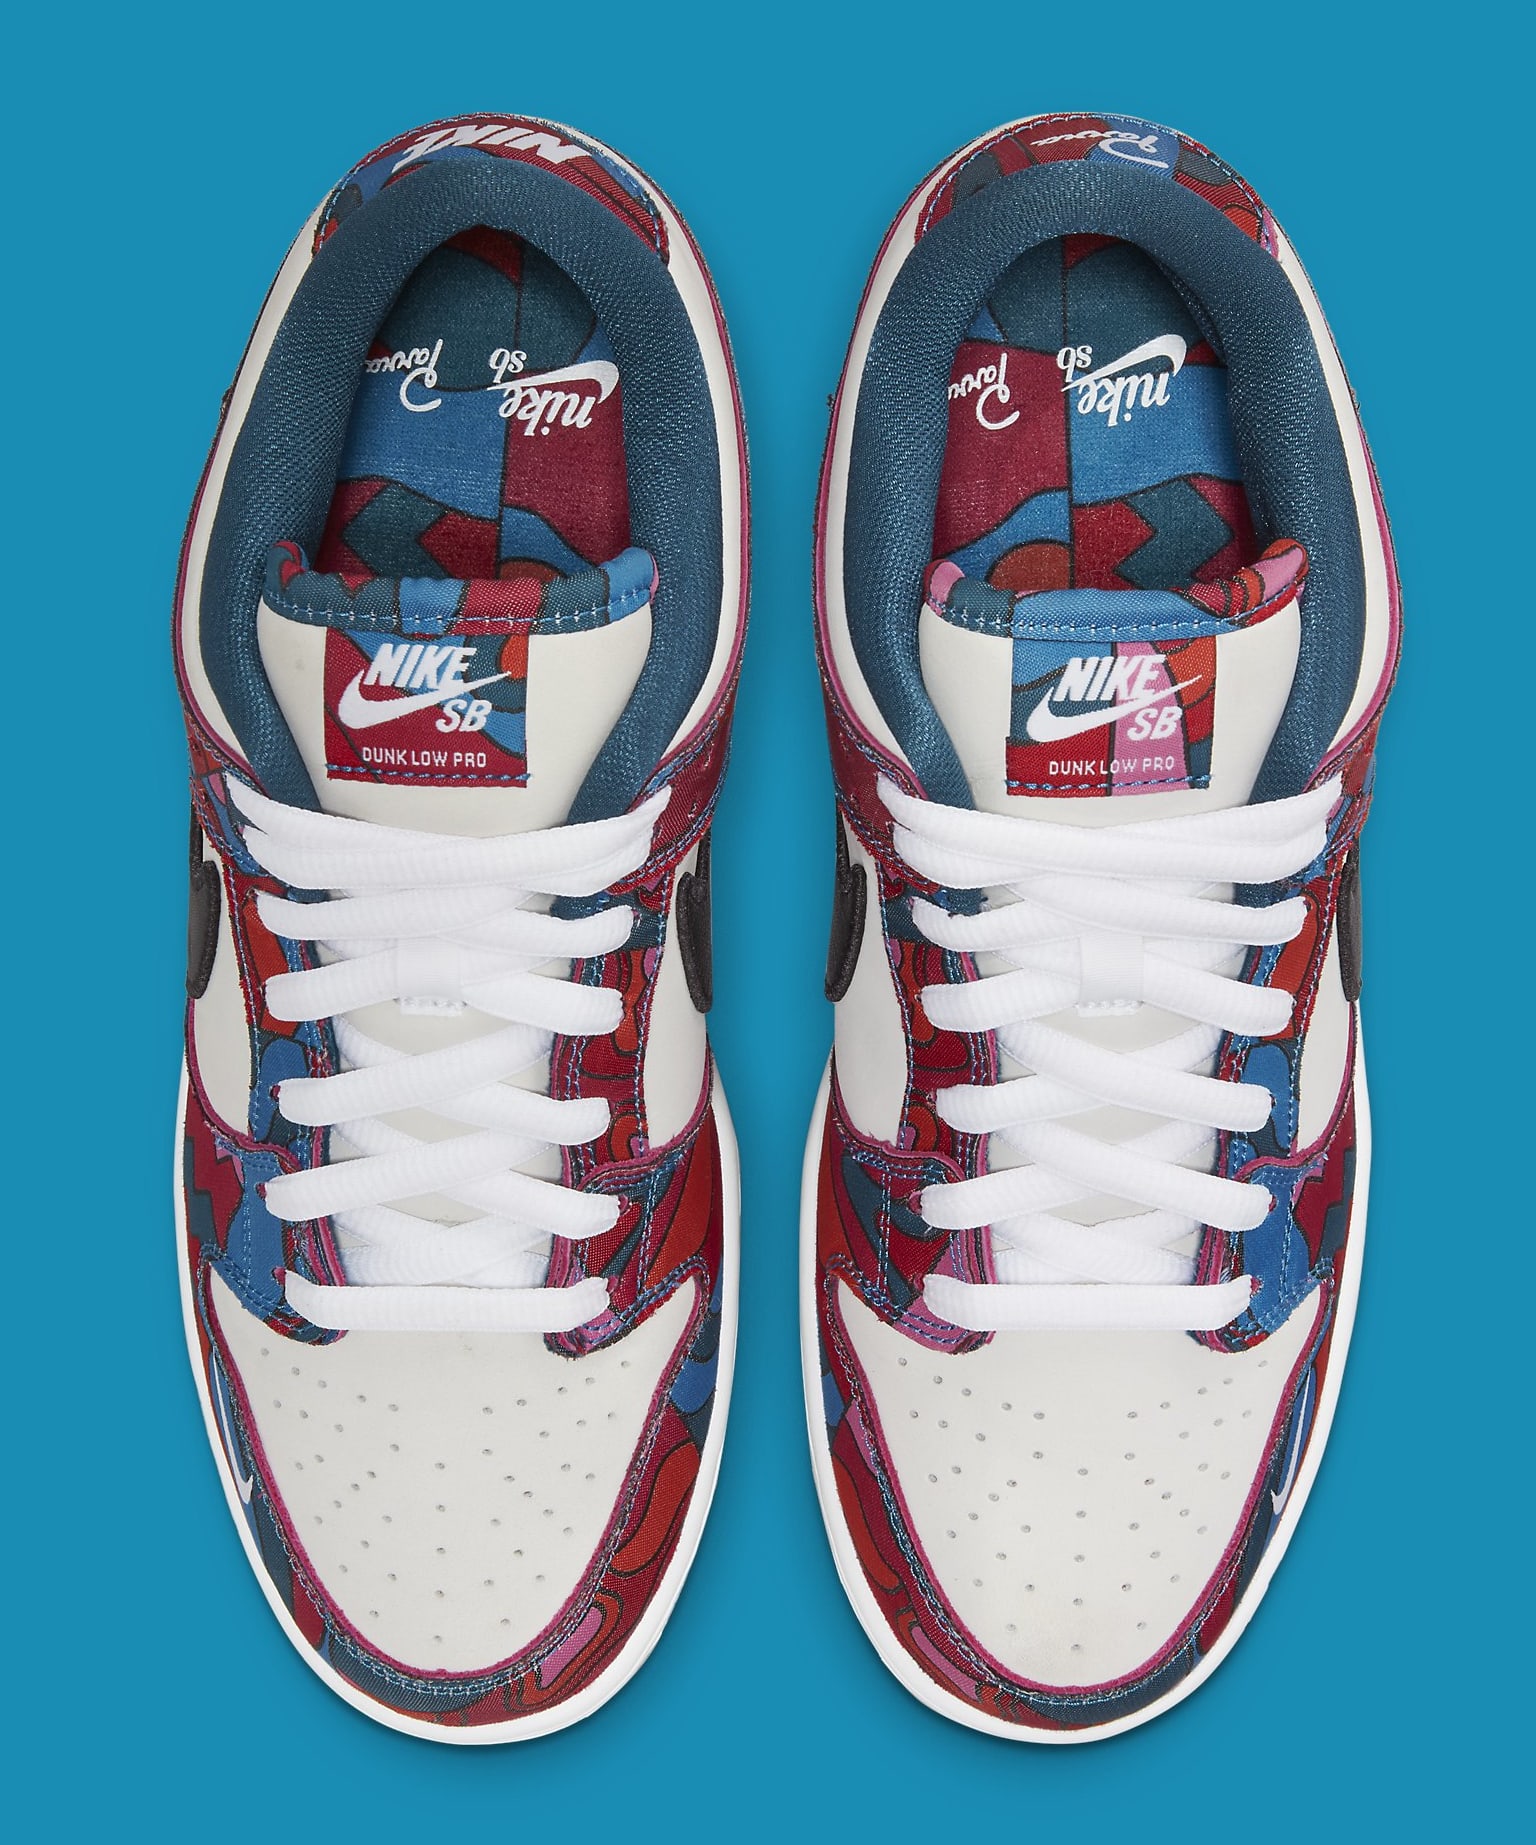 Civiel Supermarkt kapsel Parra's New Nike SB Dunk Collab Is Releasing This Month | Complex